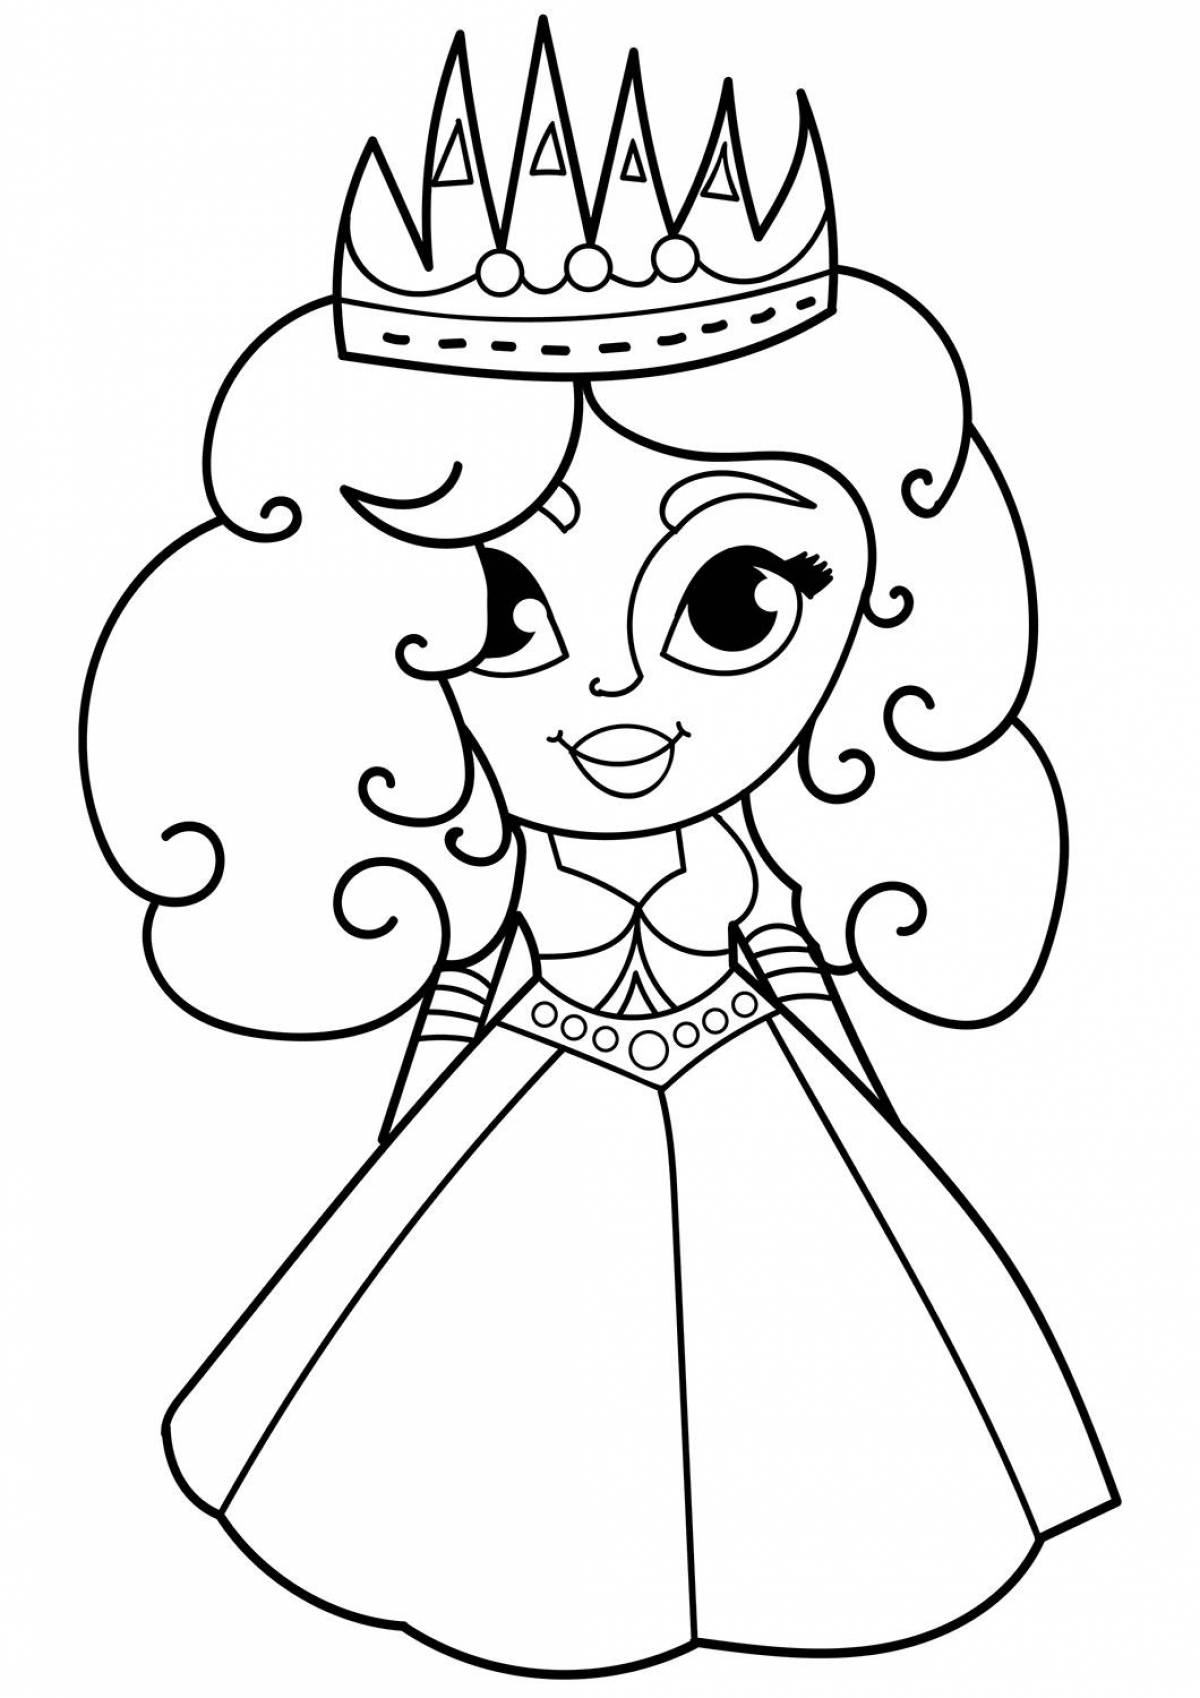 Exquisite princess coloring book for girls